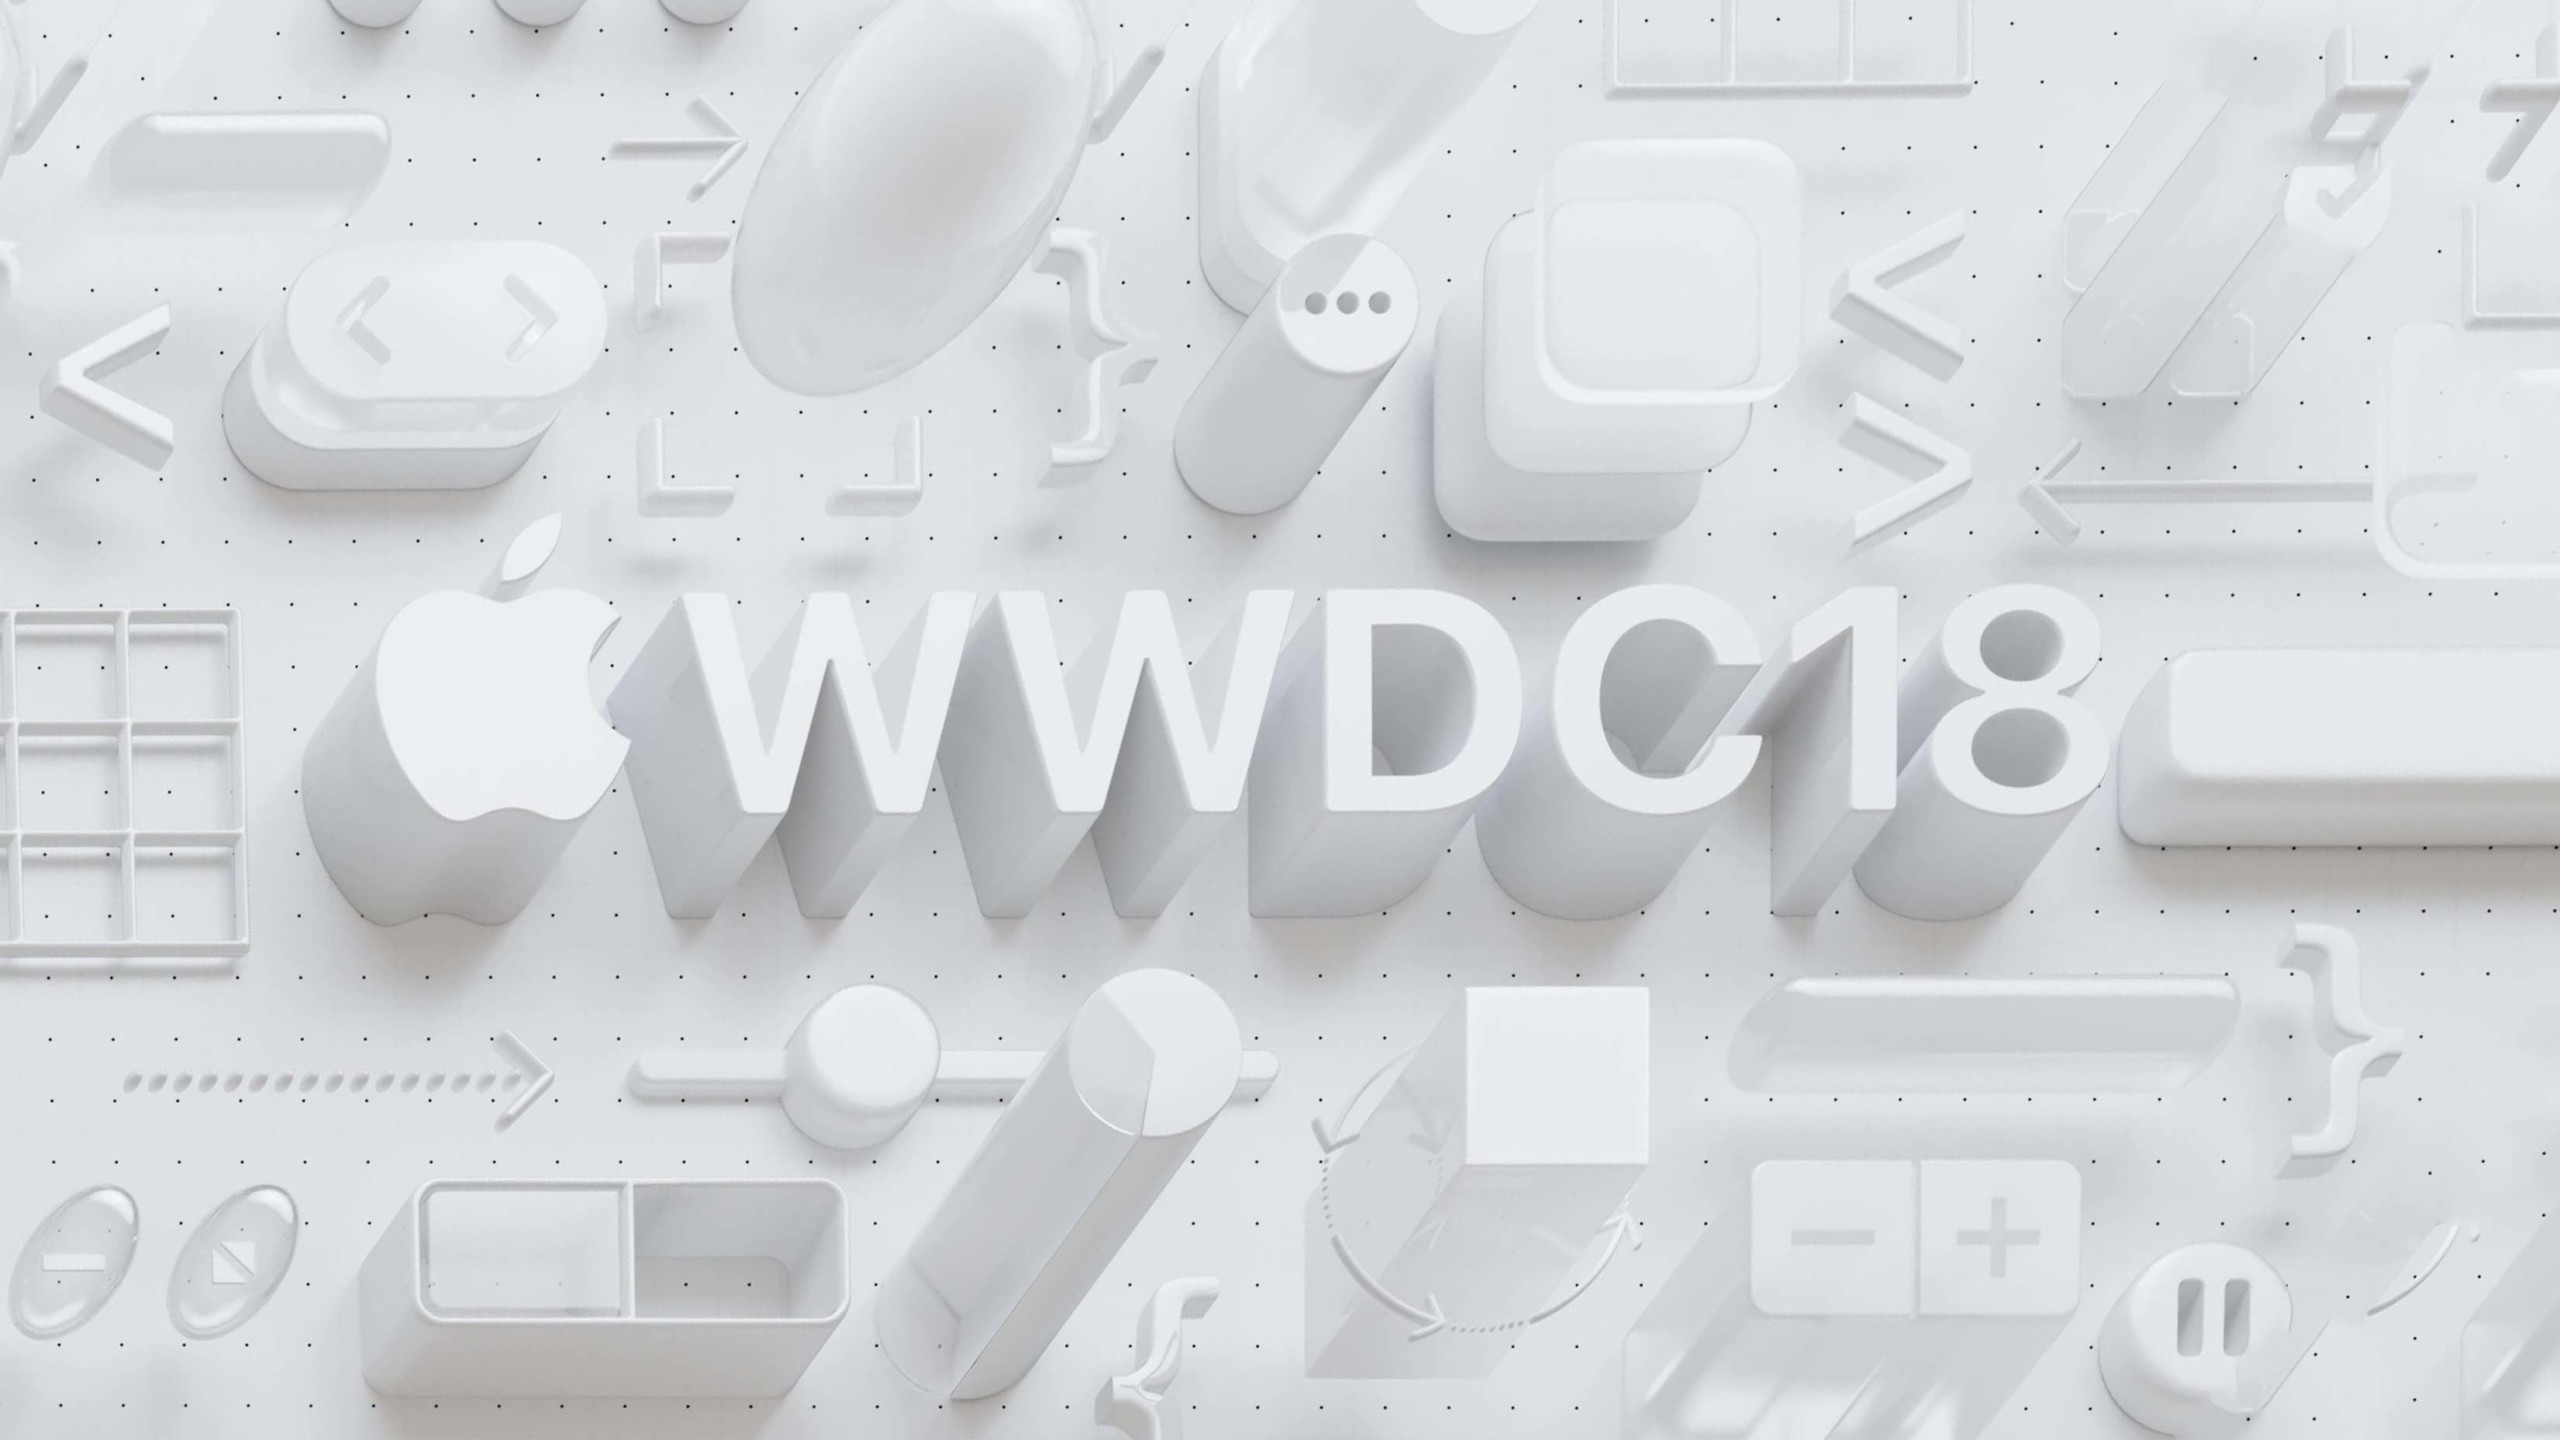 Apple WWDC 2018 Highlights – Live updates as the show unfolds